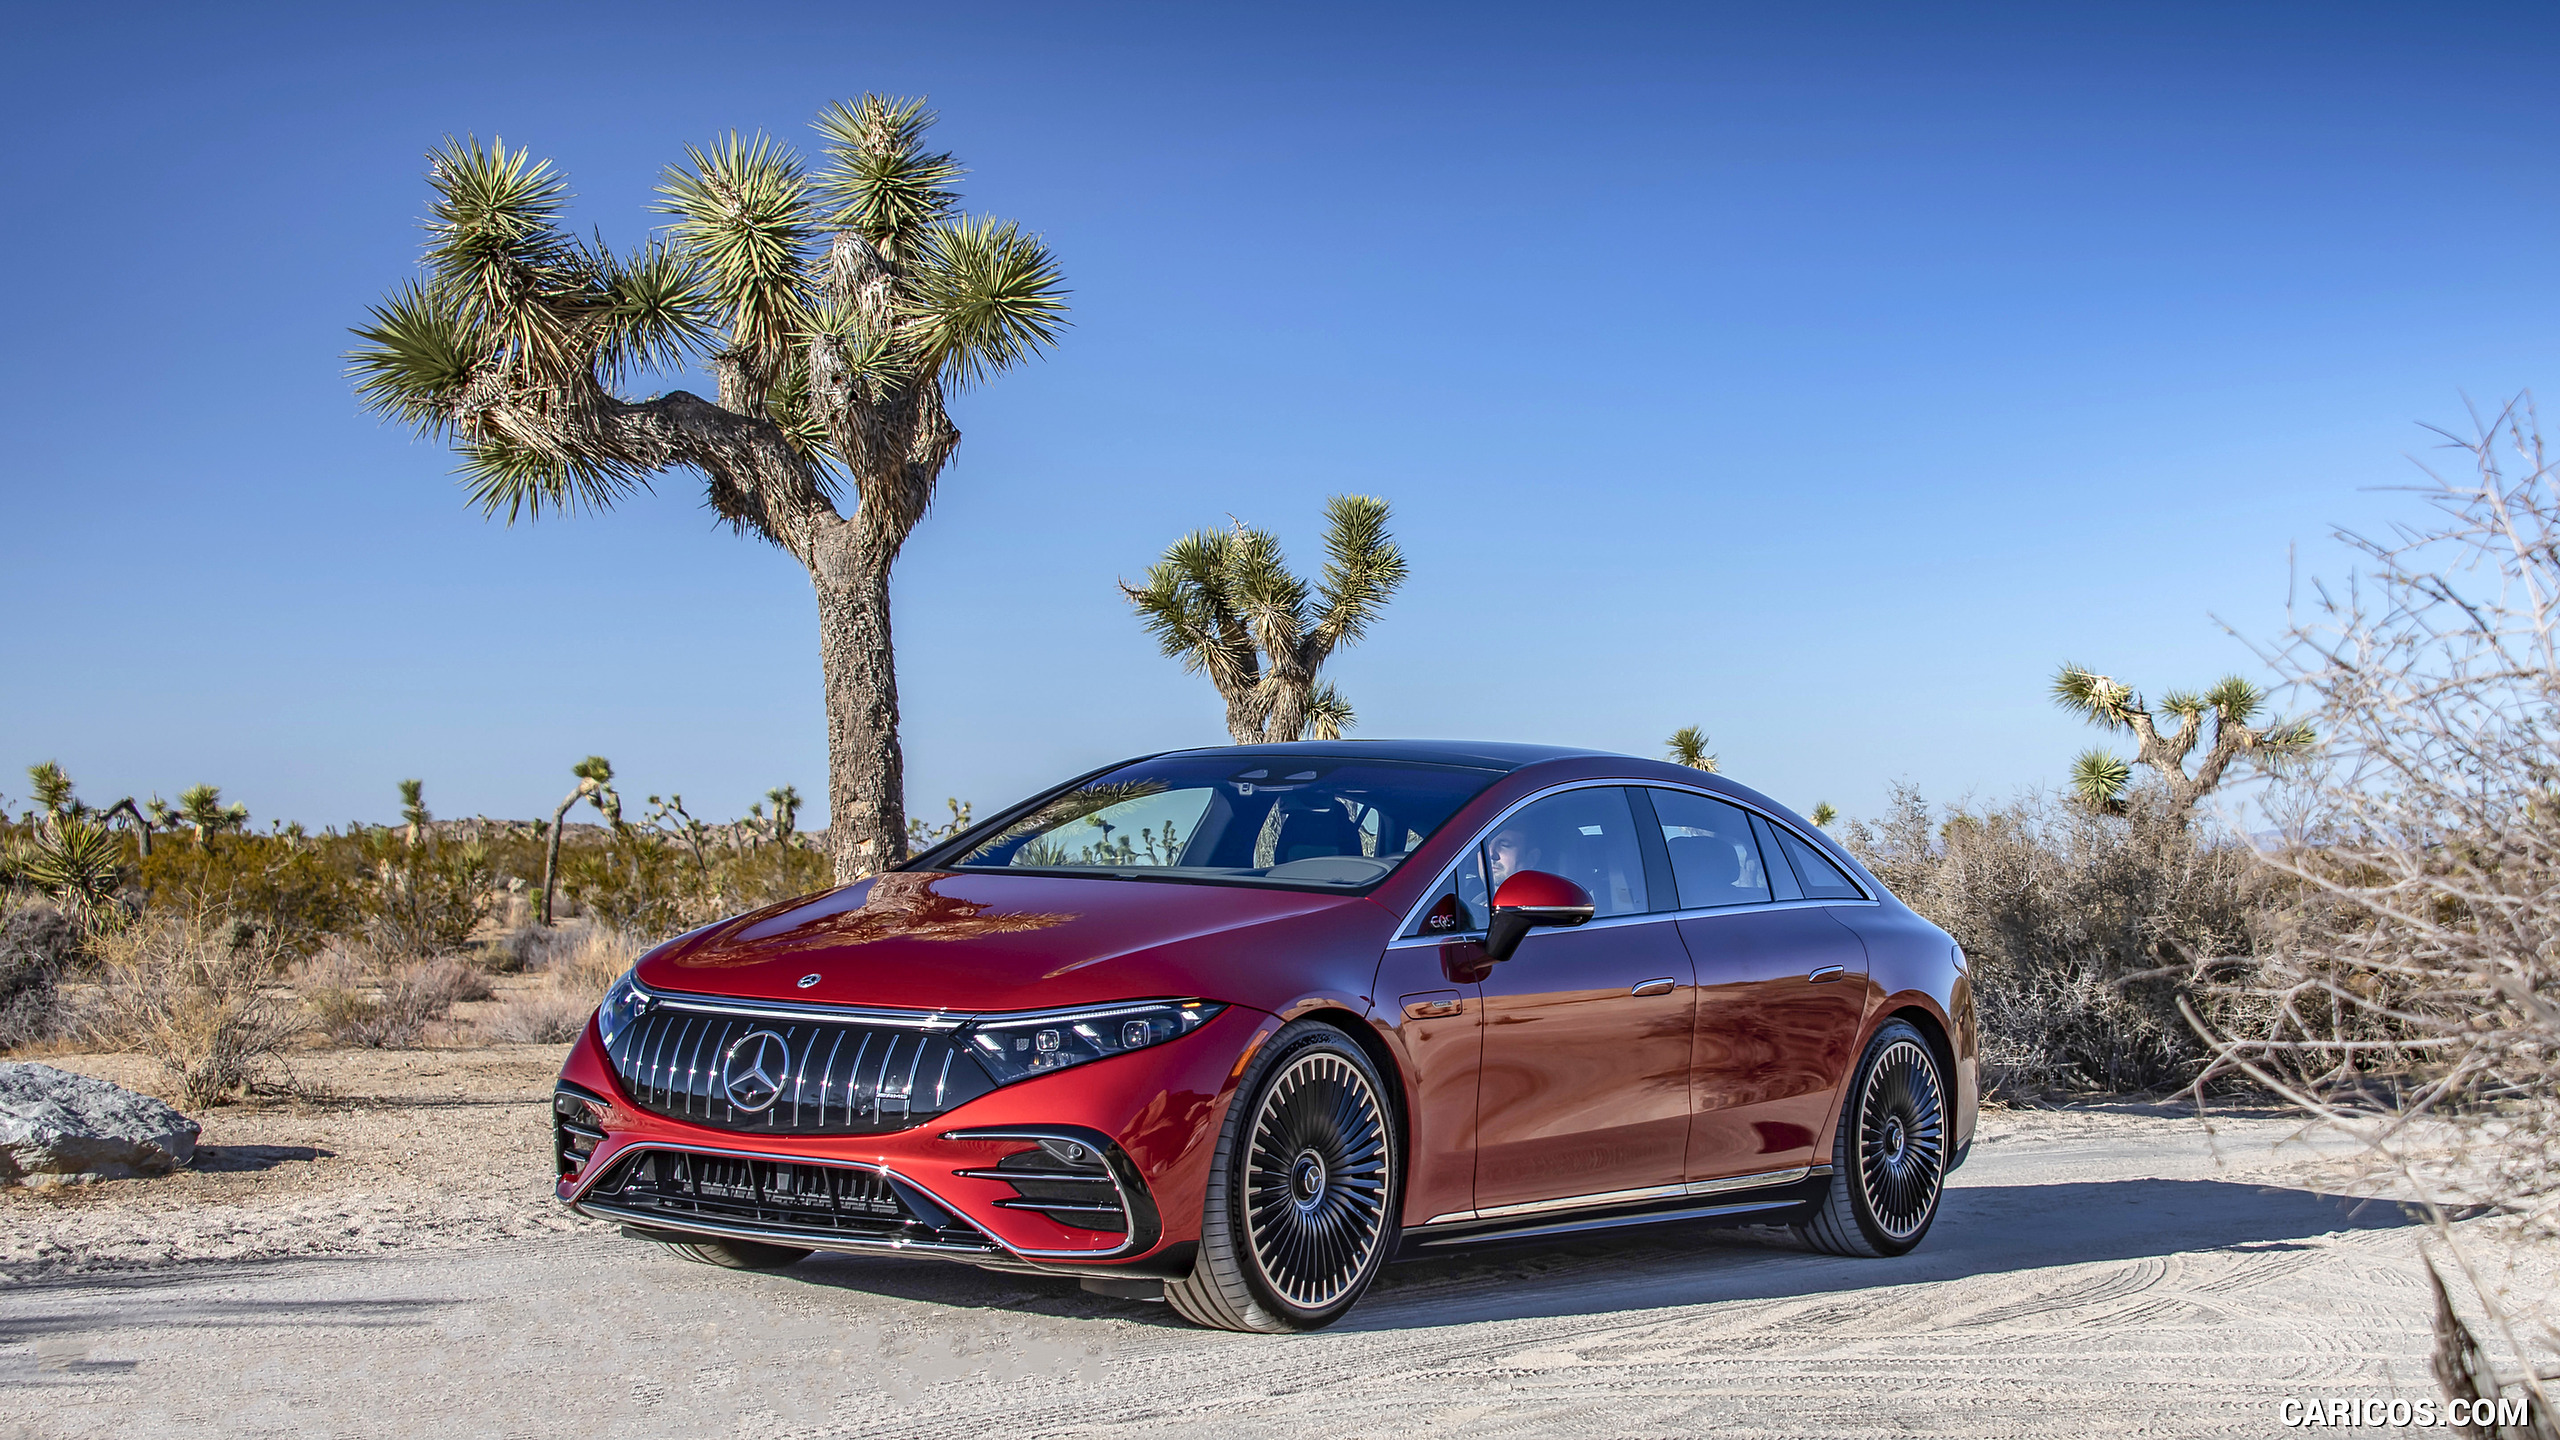 2022 Mercedes-AMG EQS 53 4MATIC+ (Color: Hyazinth Red Metallic) - Front Three-Quarter, #54 of 76